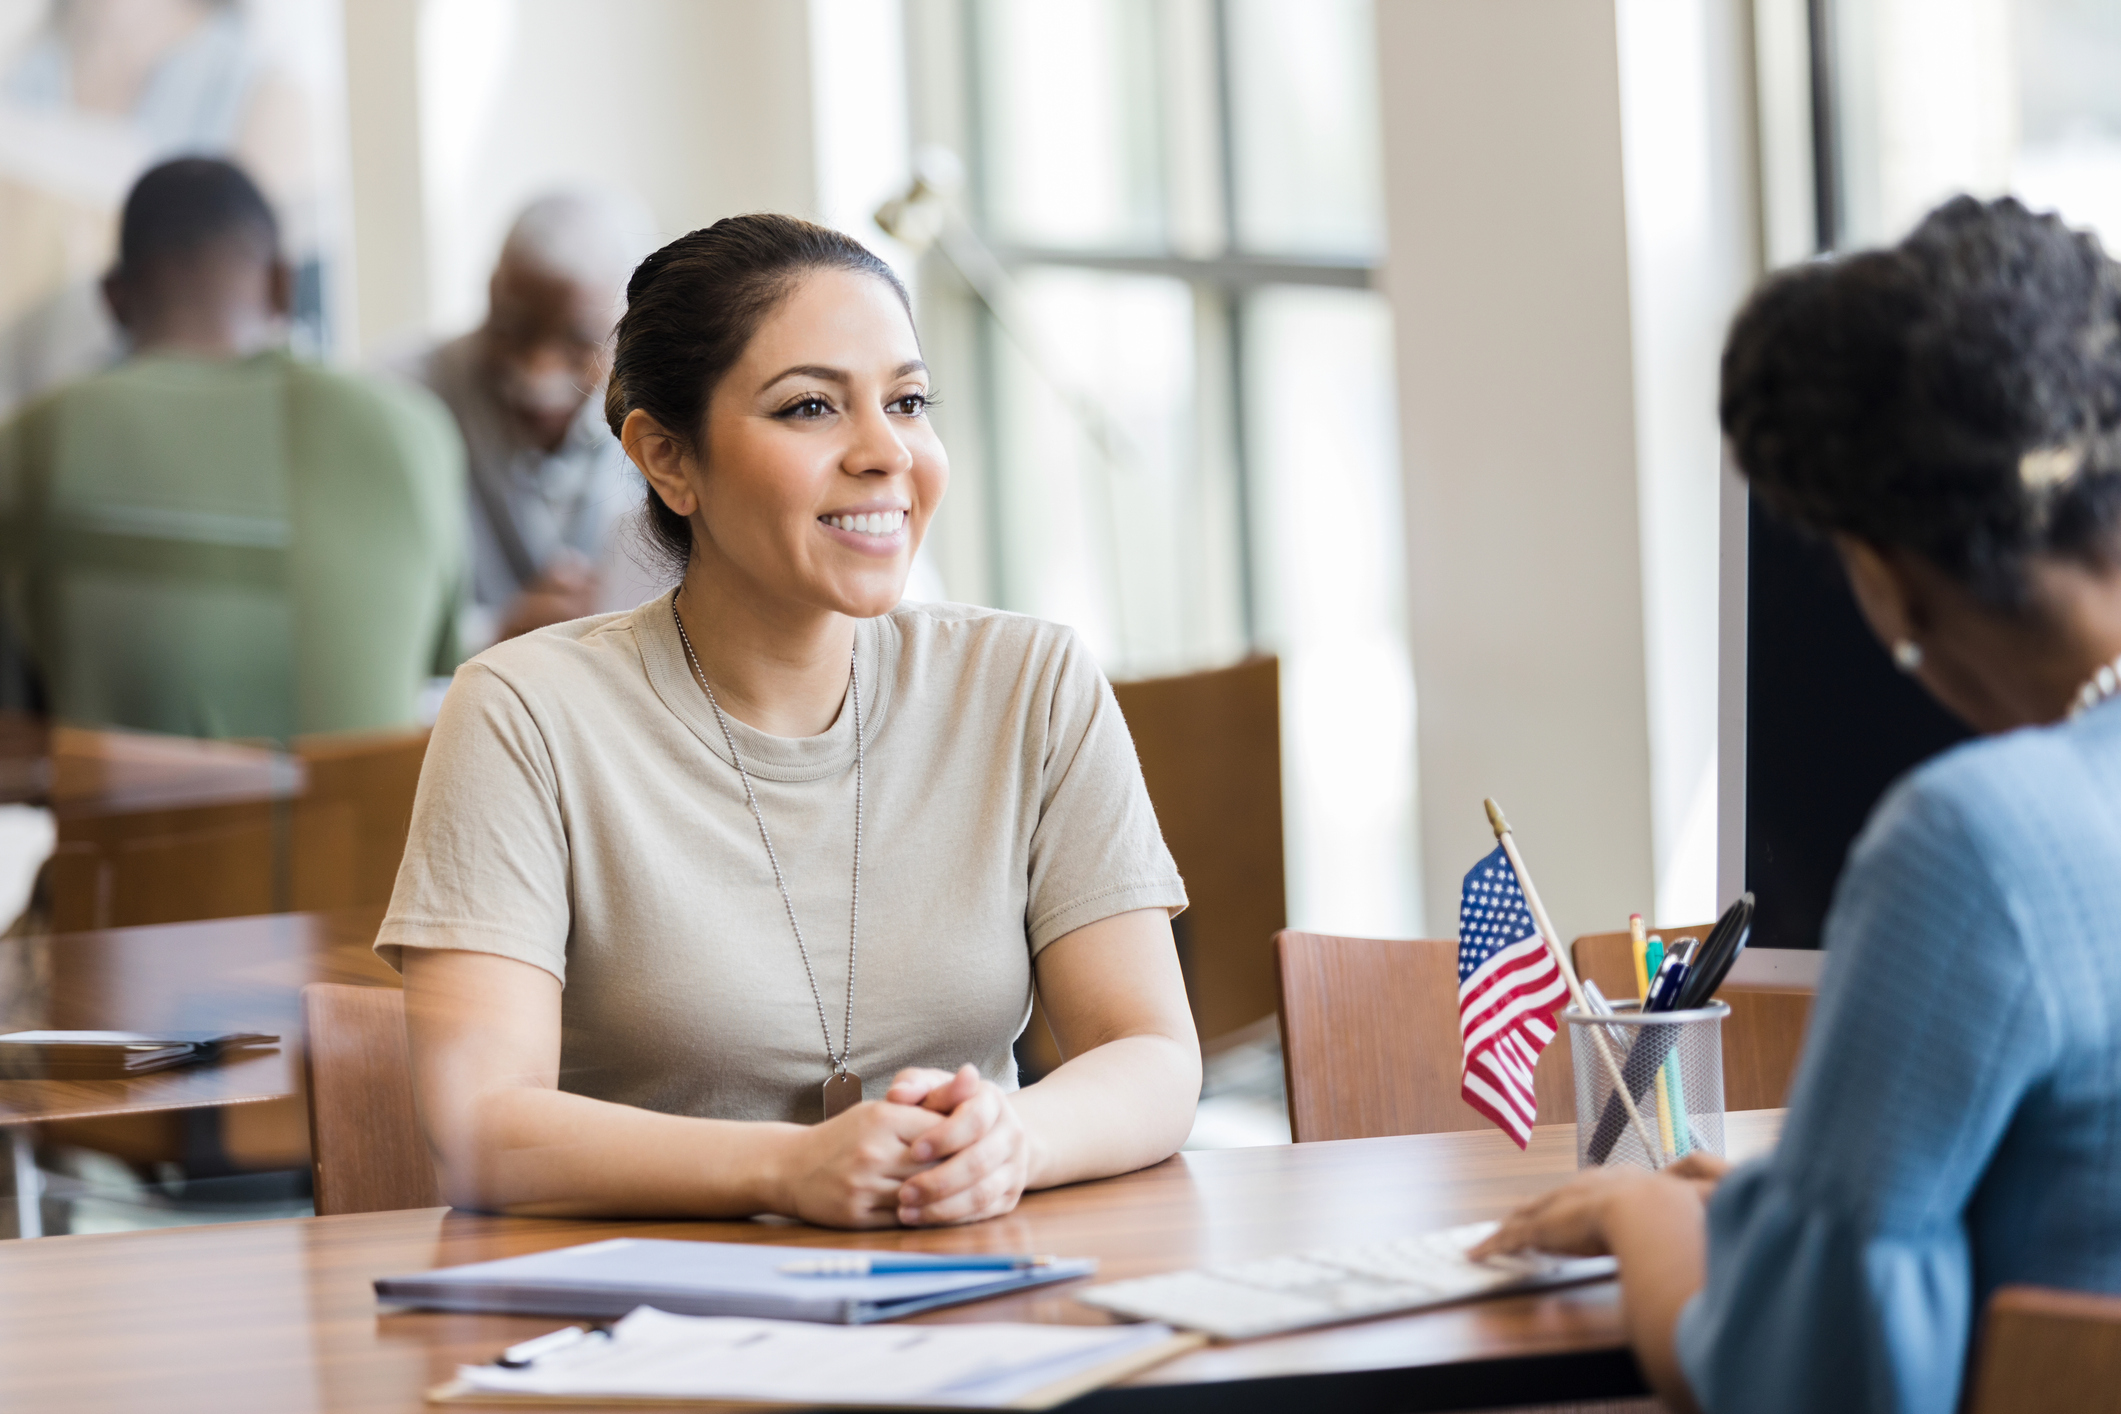 Recruiting Veteran Job Applicants: Tips for Your Small Business